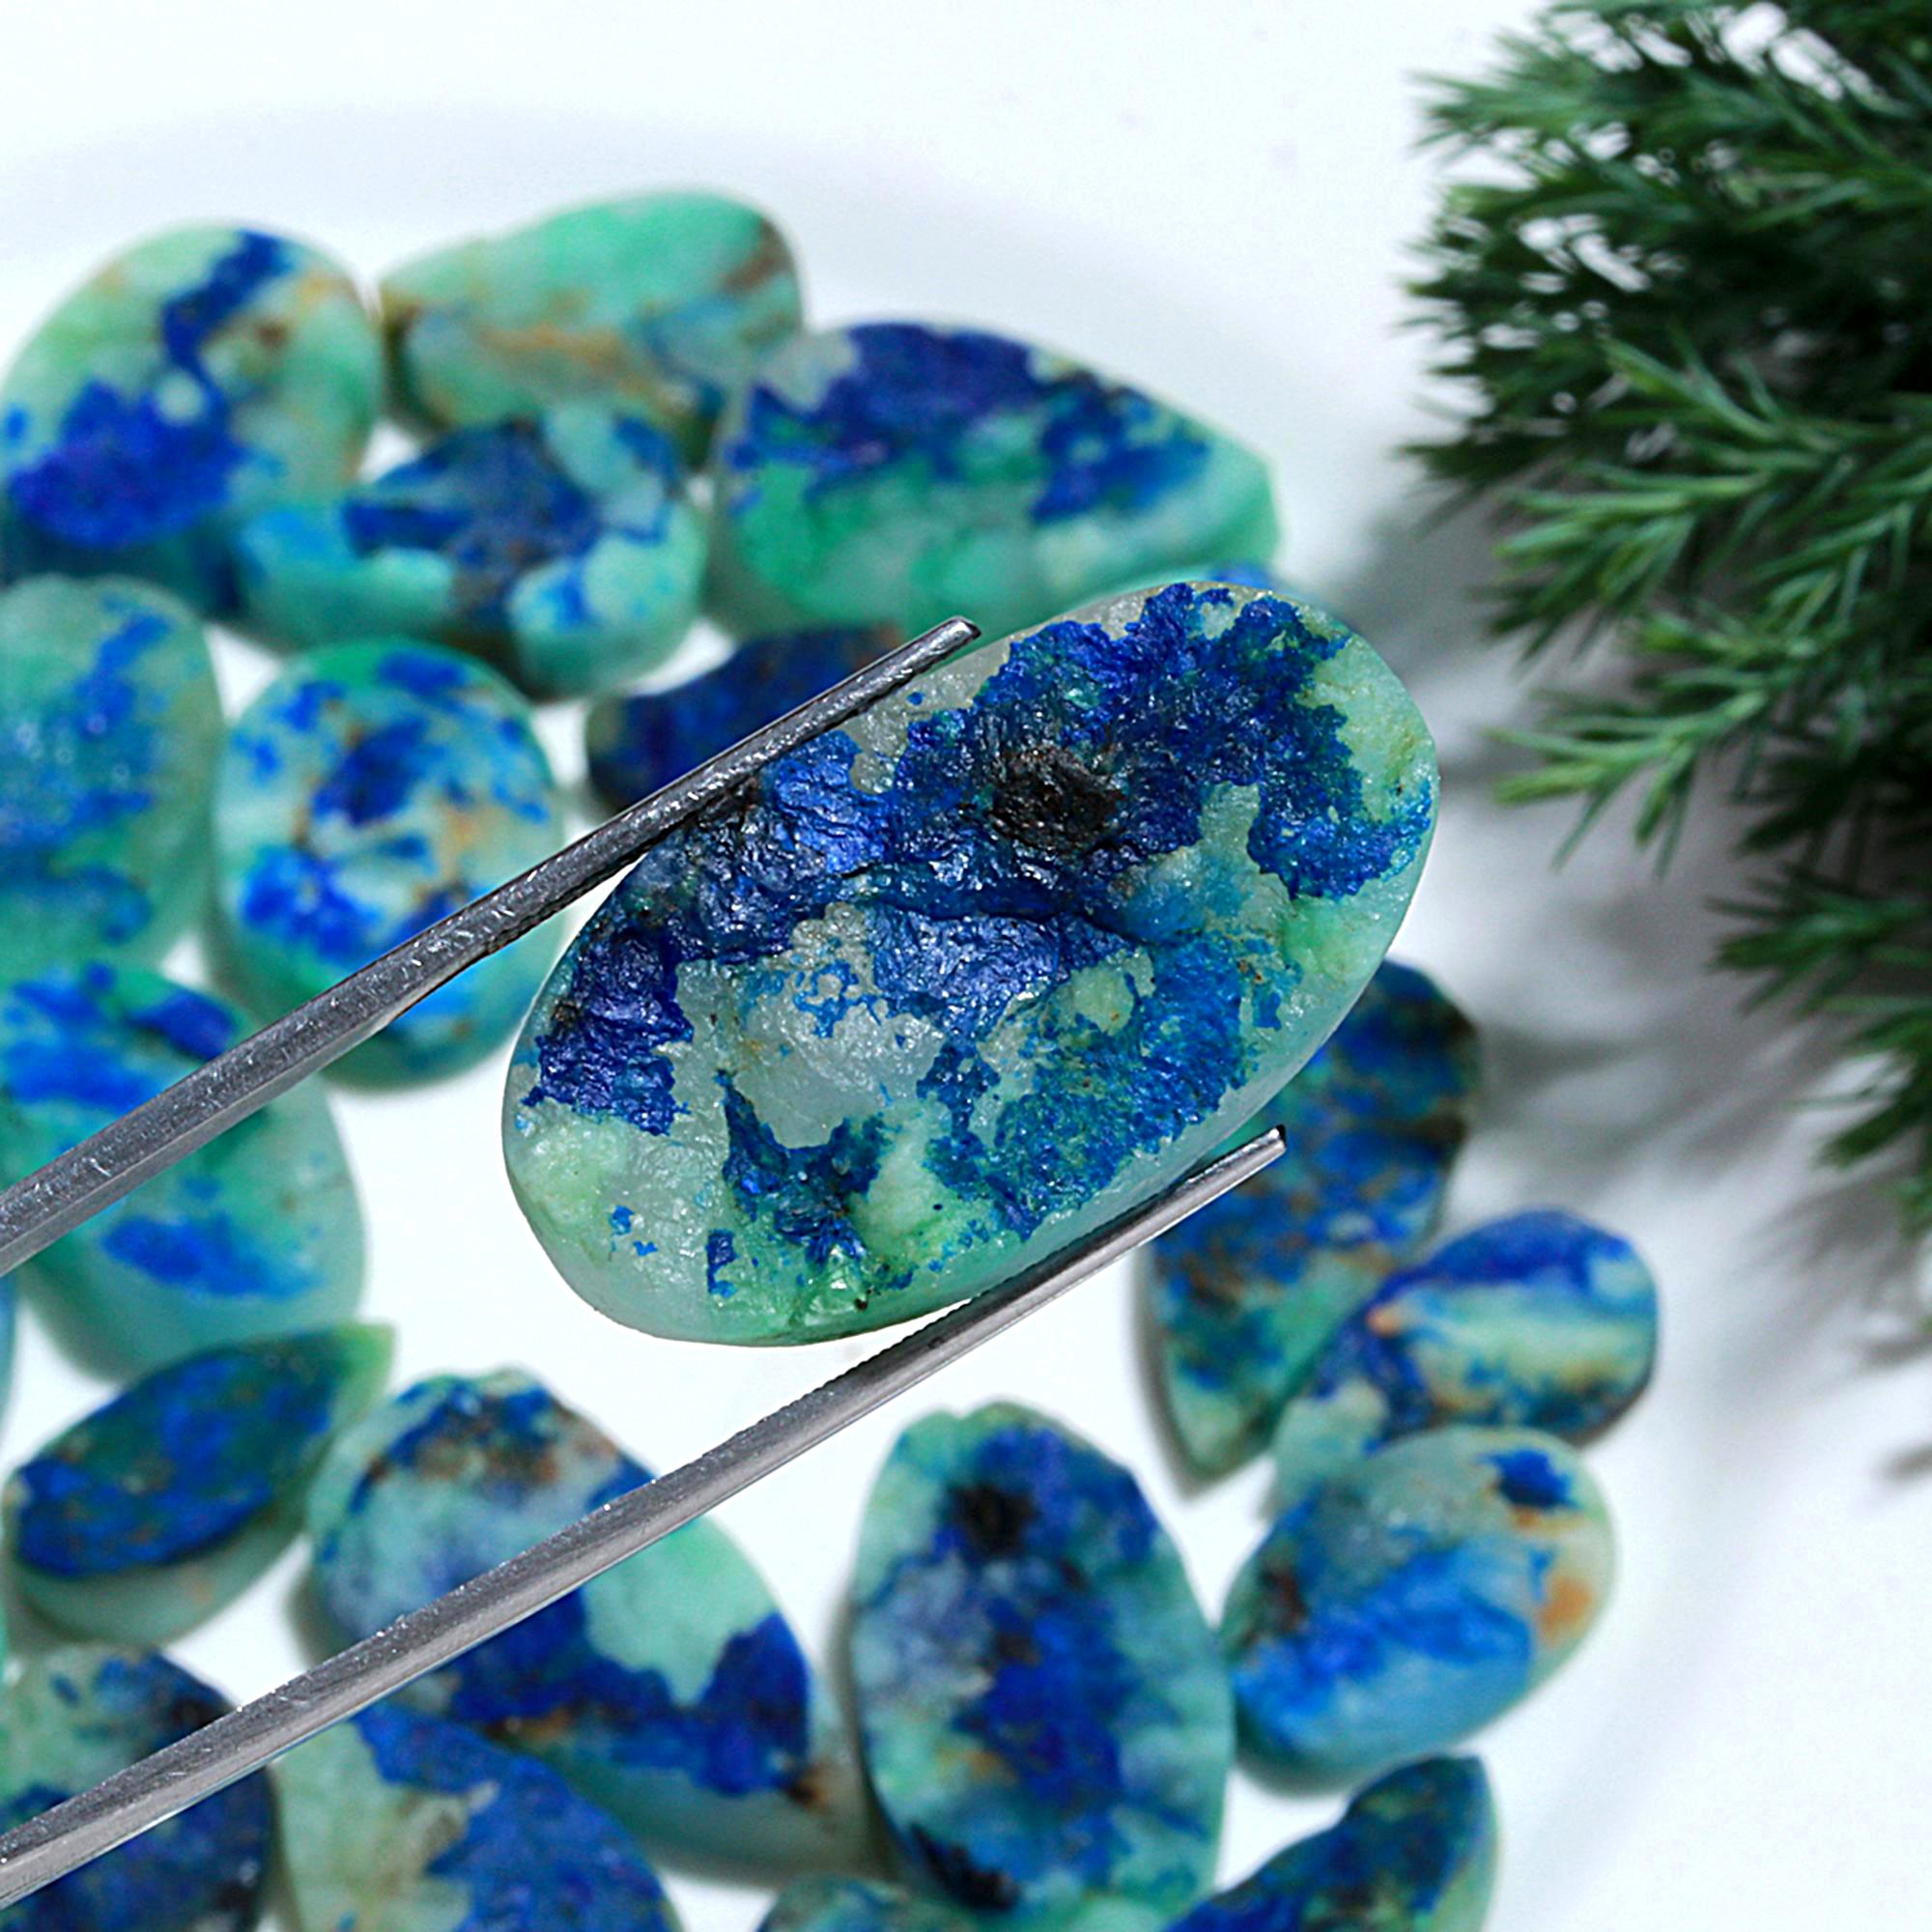 40 Pcs 570.Cts Natural Azurite Druzy Unpolished Loose Cabochon Gemstone For Jewelry Wholesale Lot Size 31x17 17x13mm#1178